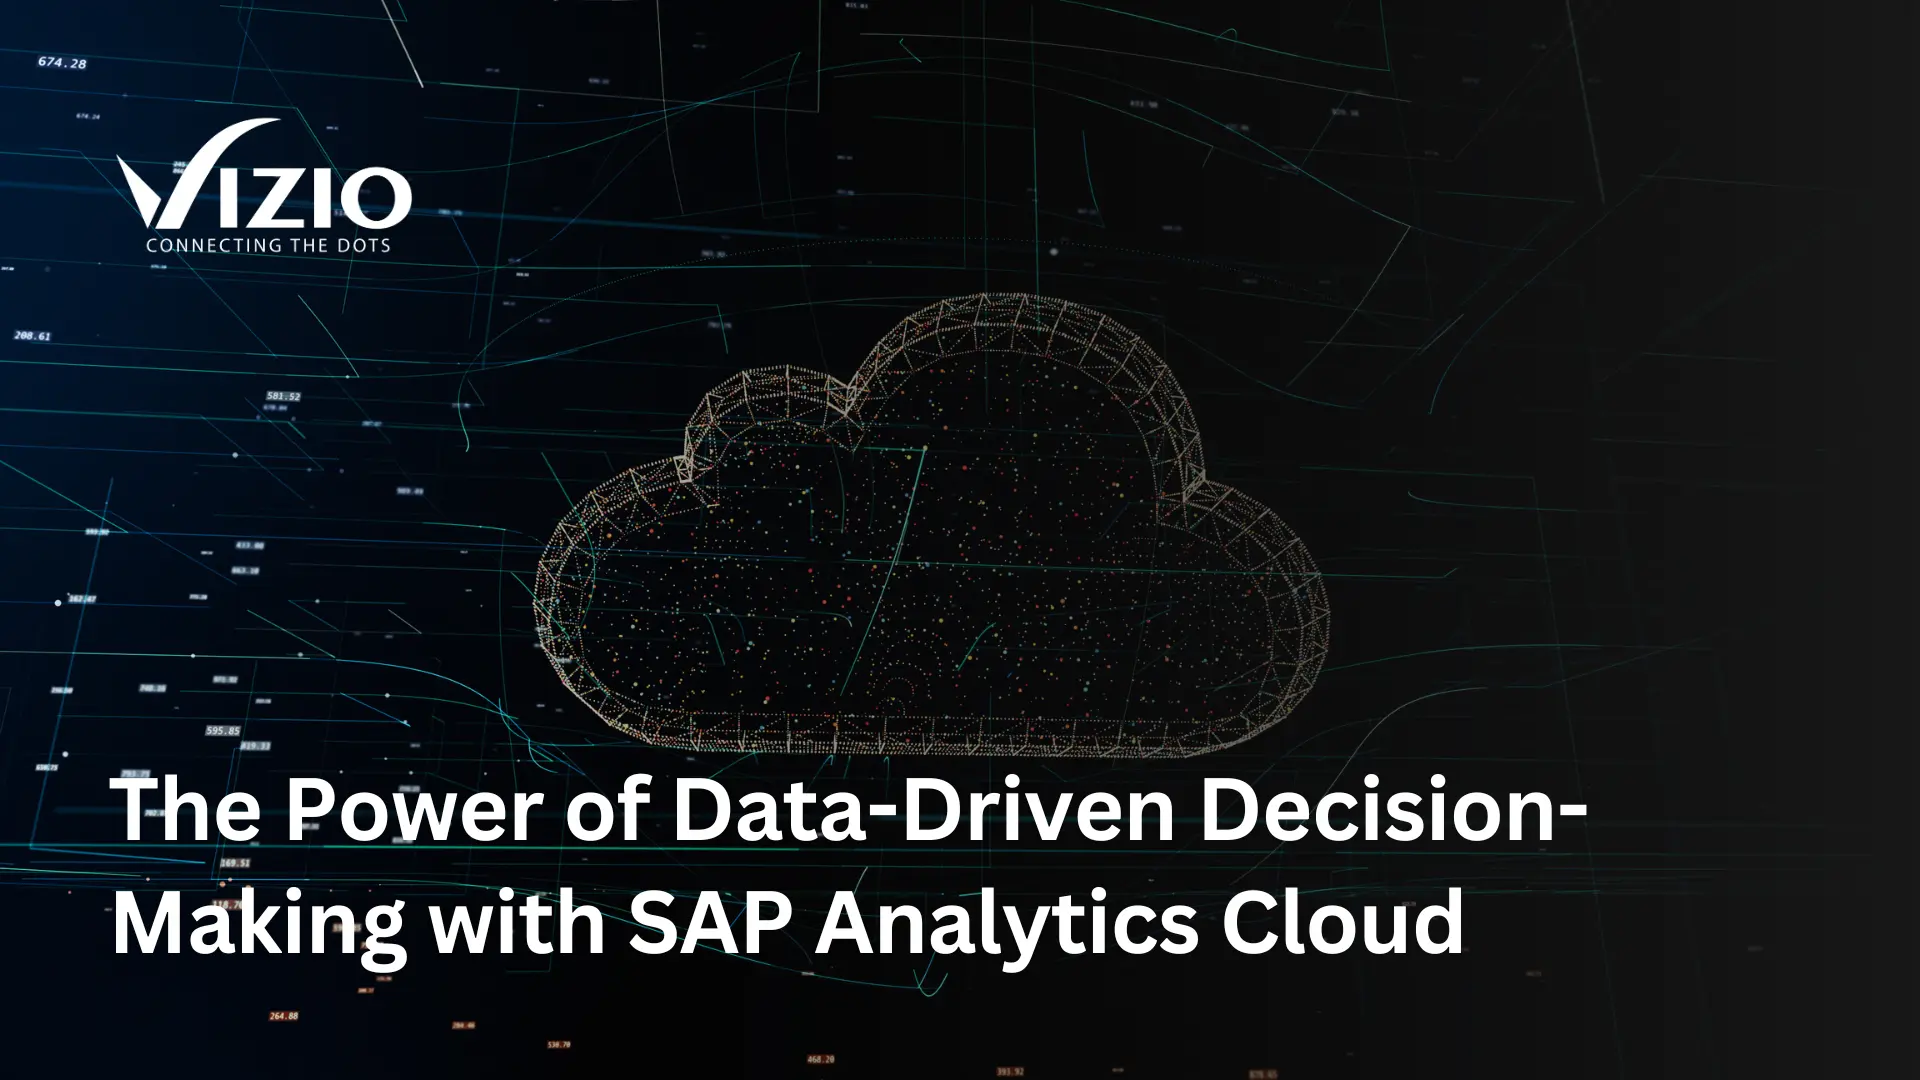 The Power of Data-Driven Decision-Making with SAP Analytics Cloud